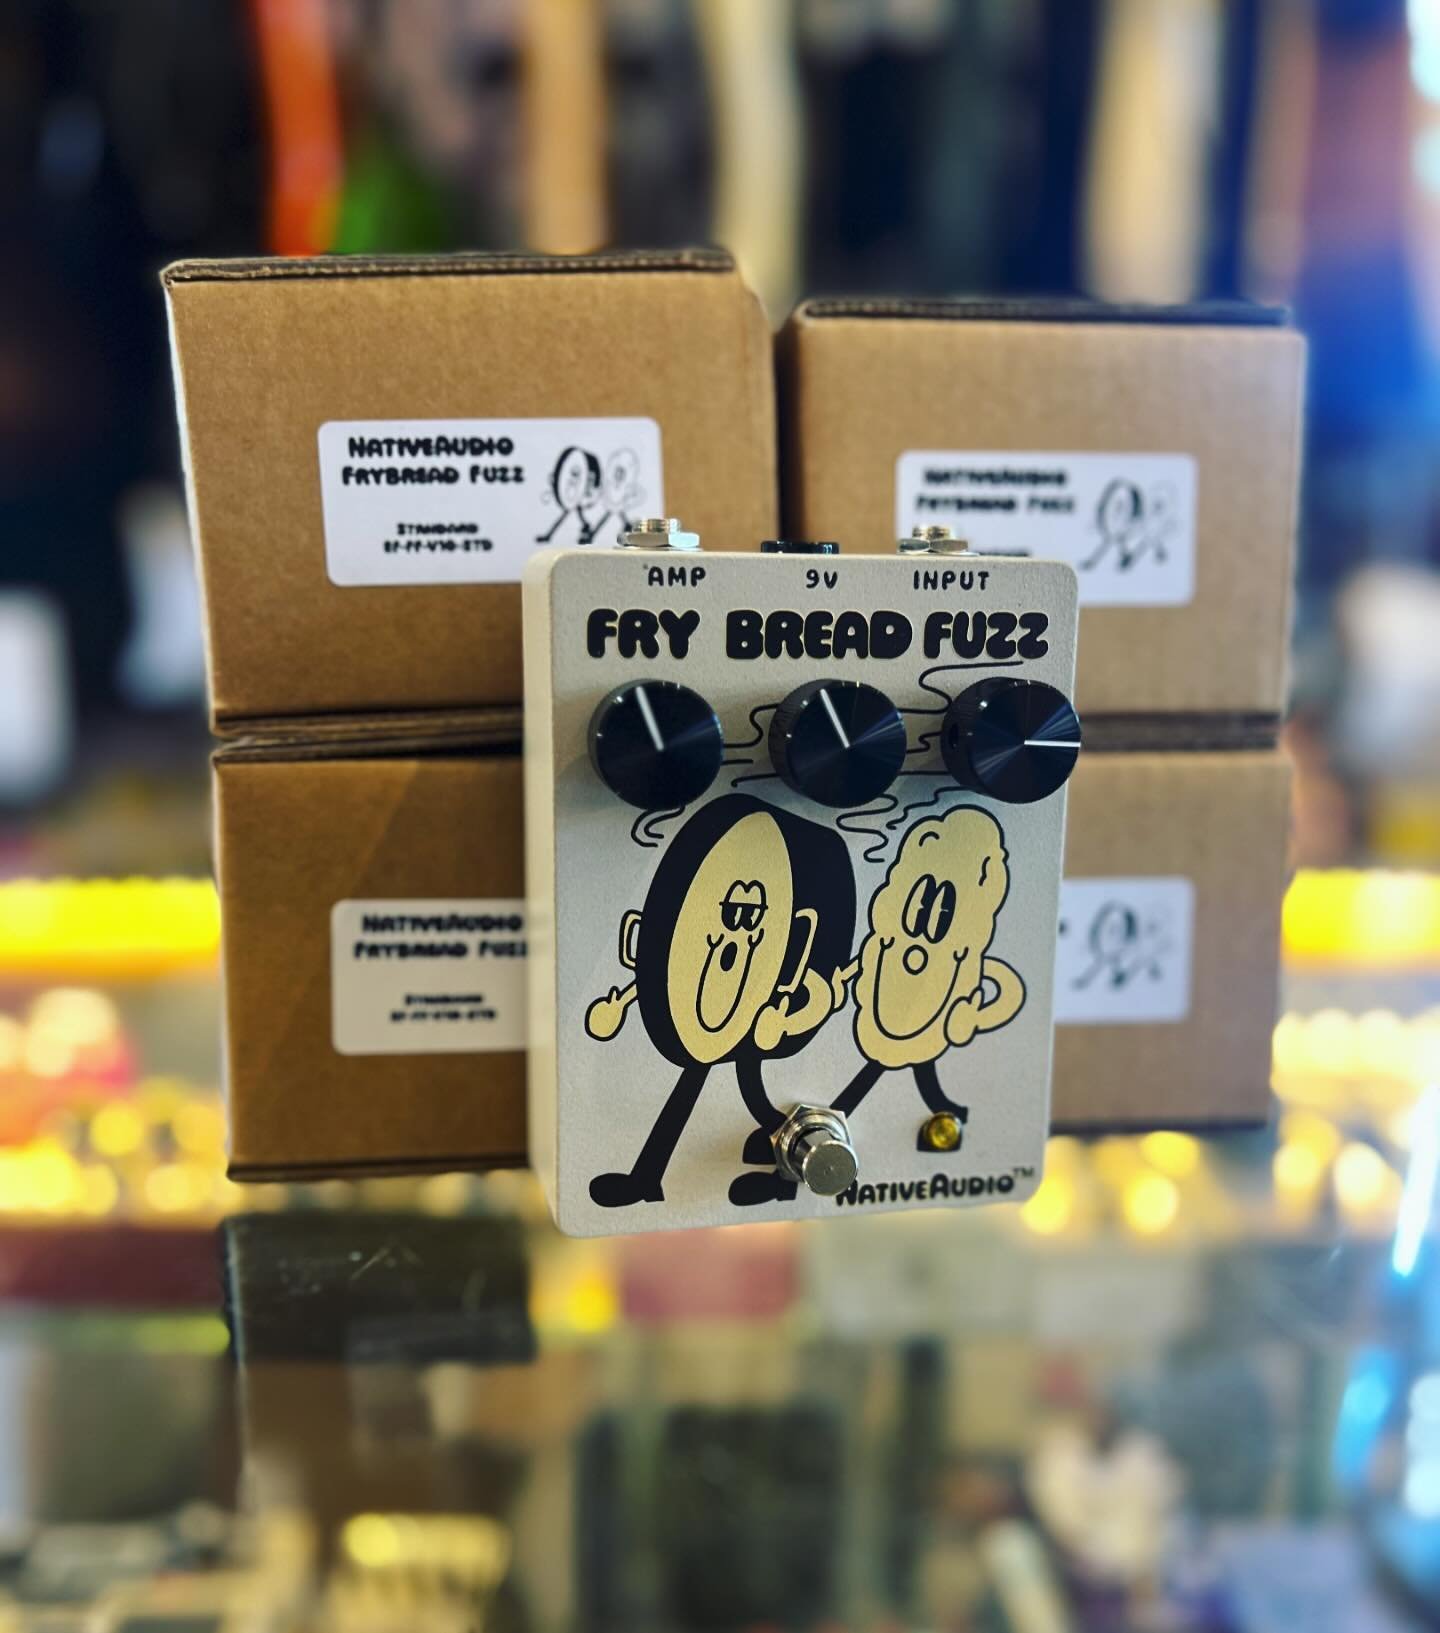 Awesome new new from @nativeaudio just landed!! We&rsquo;re very proud of partnership with Native Audio and so stoked to be one of the few places that gets to have the Frybread Fuzz in store! It&rsquo;s awesome and come check it out! #oaklandguitars 